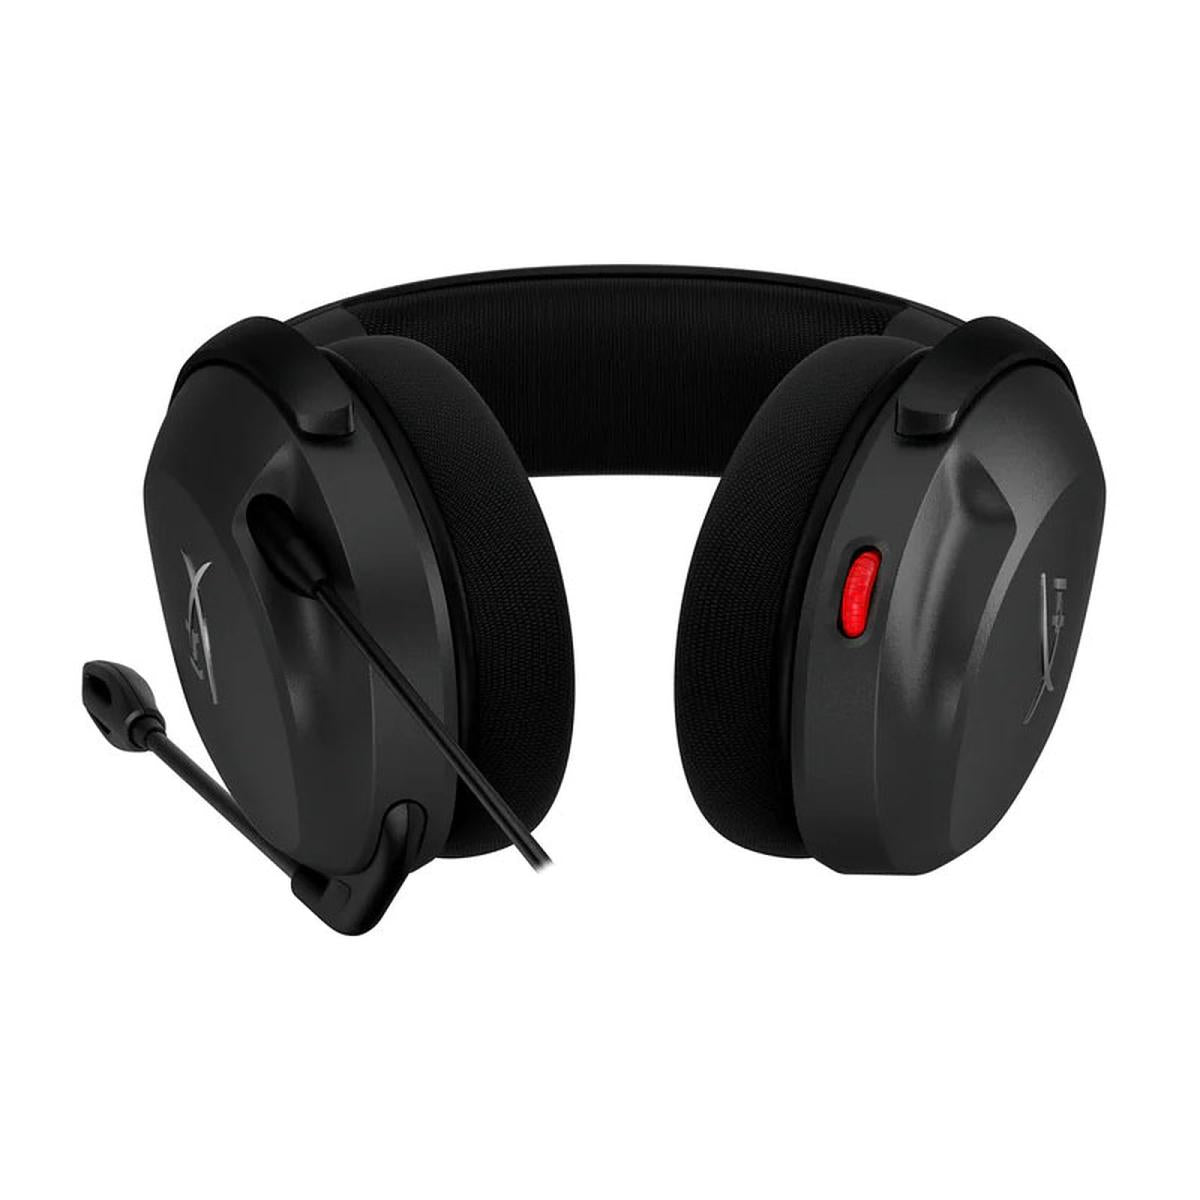 HyperX Cloud Stinger 2 Core Gaming Headsets